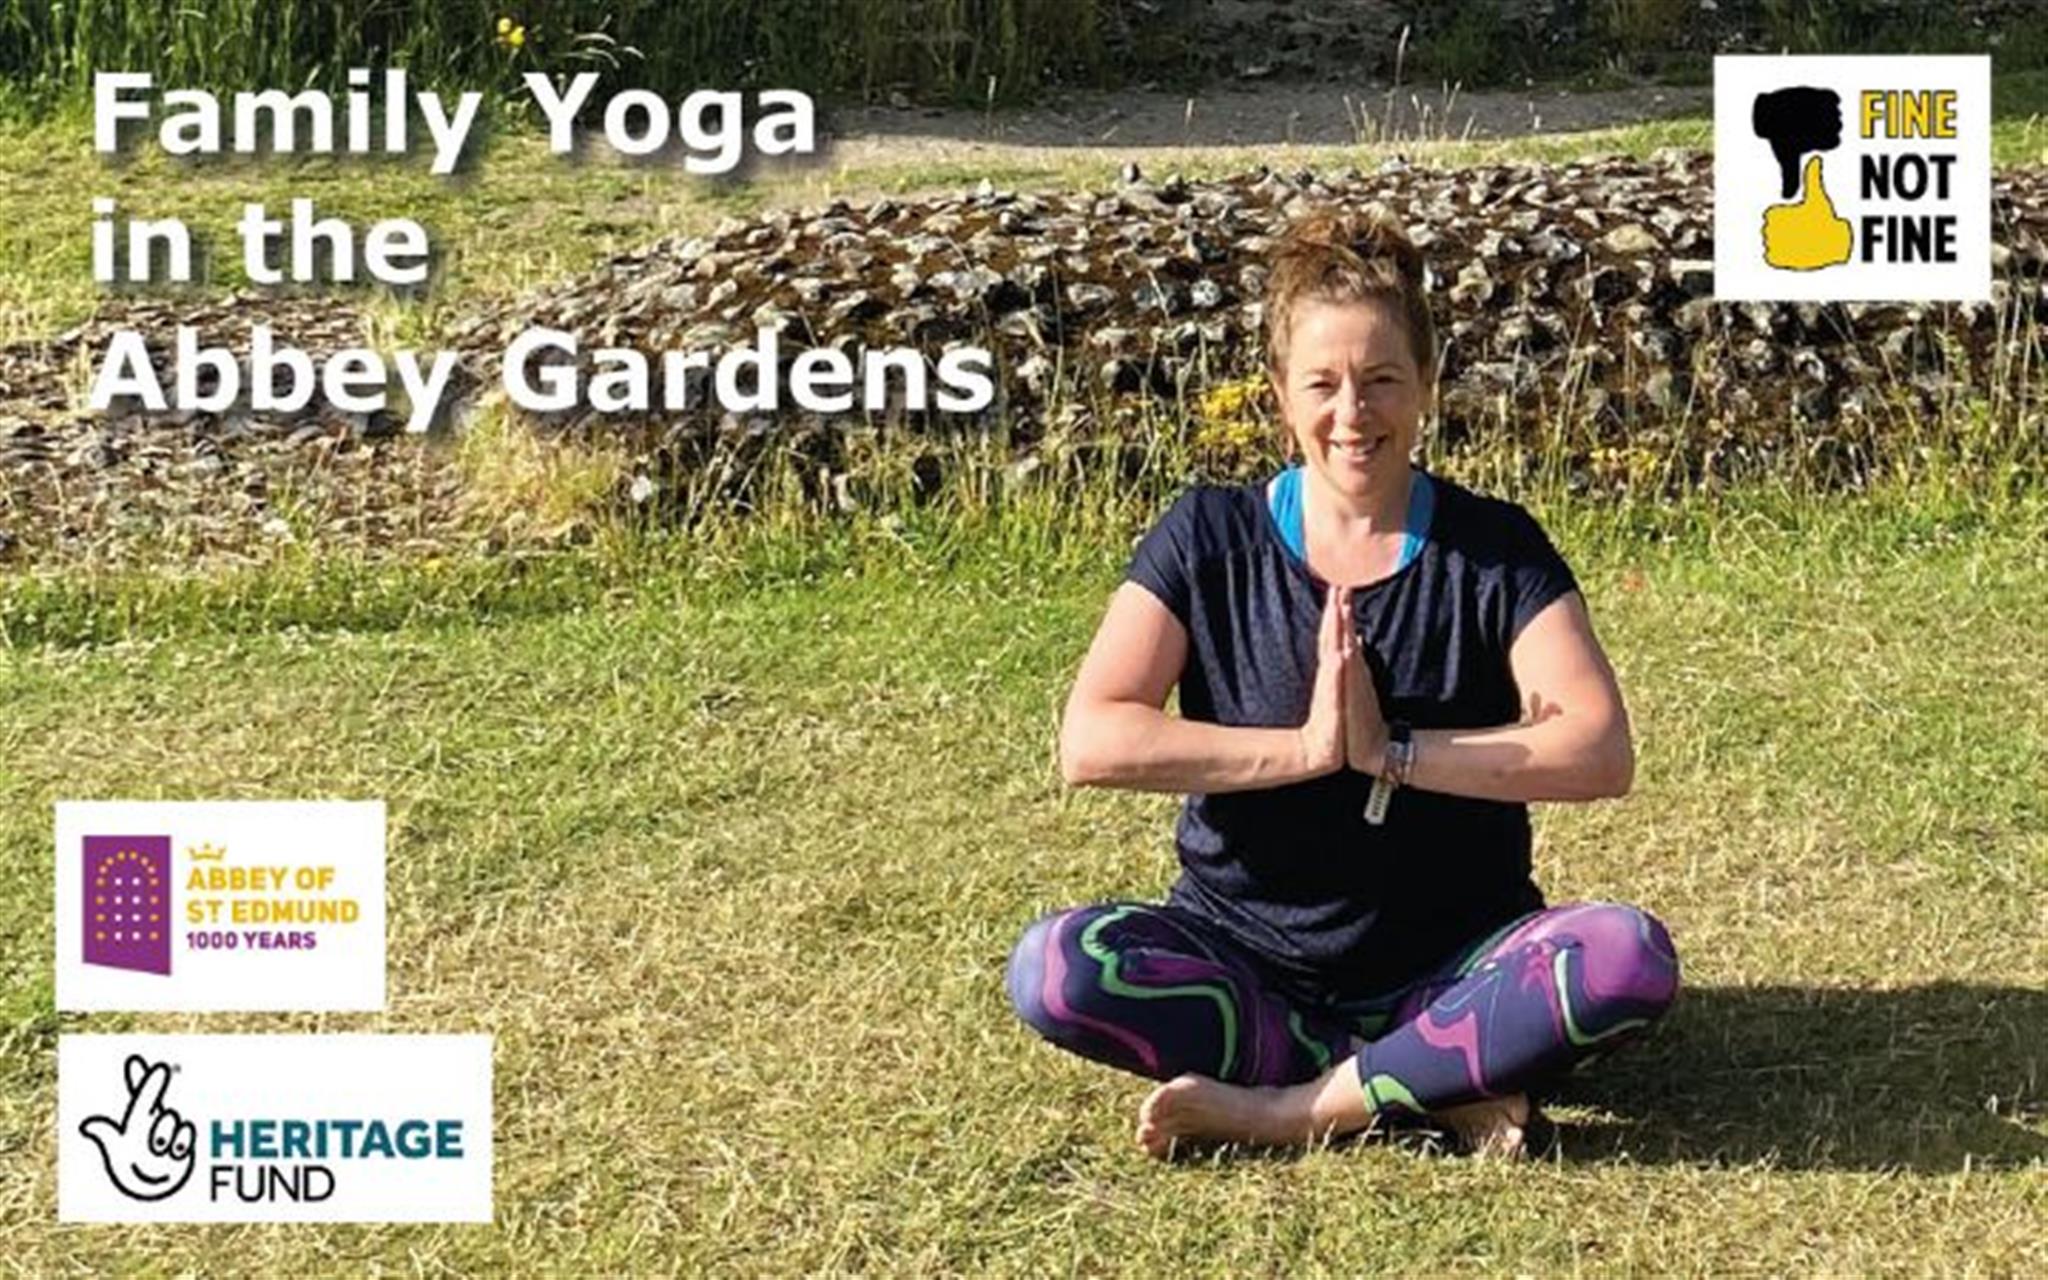 Free Family Yoga in the Abbey Gardens